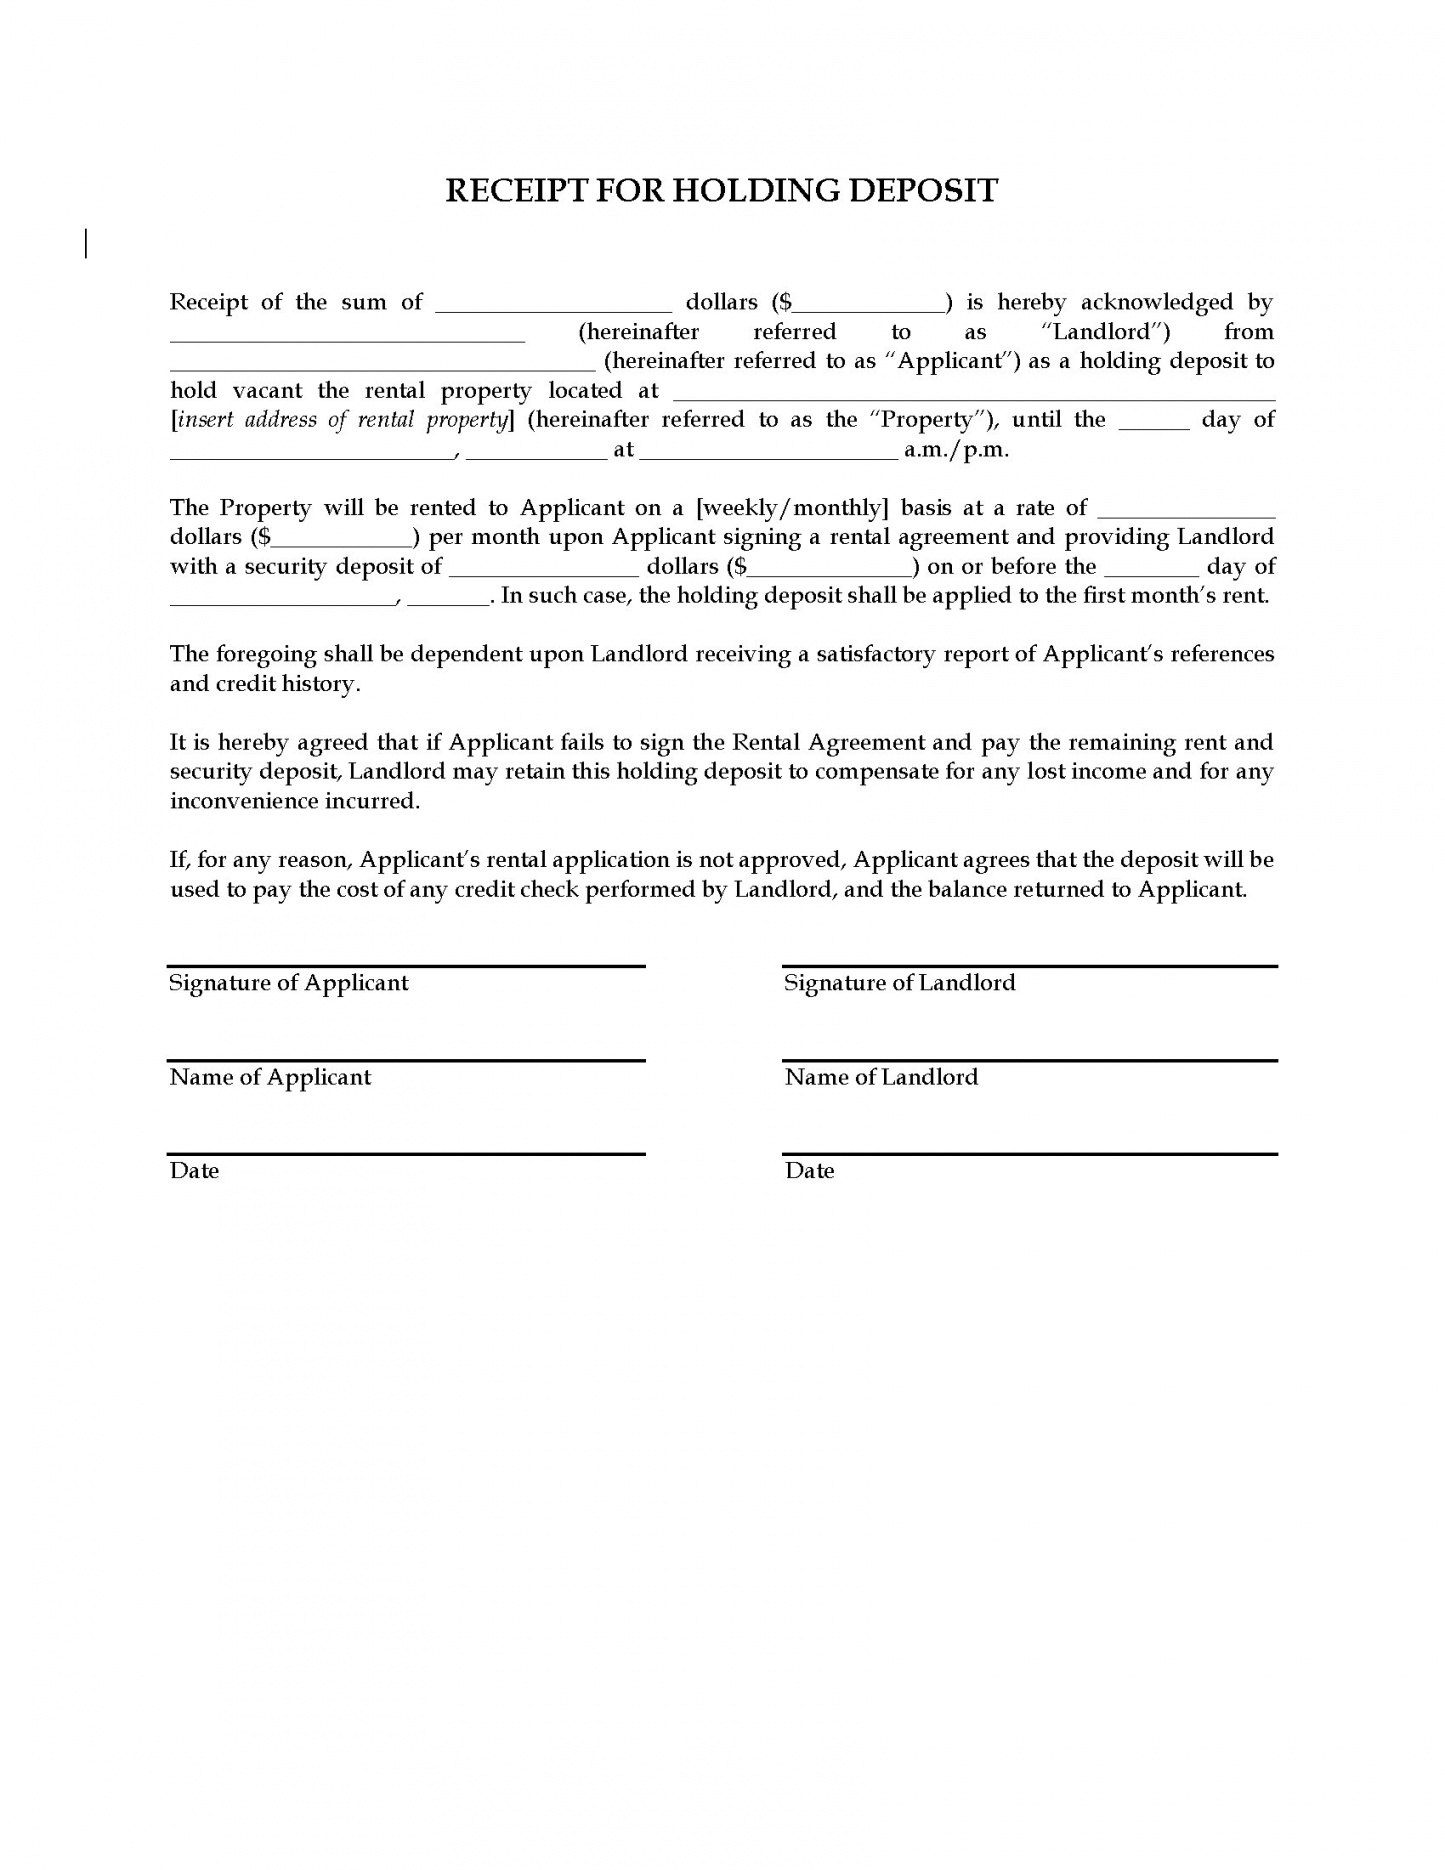 Receipt For Holding Deposit On Rental Property | Legal Forms And 